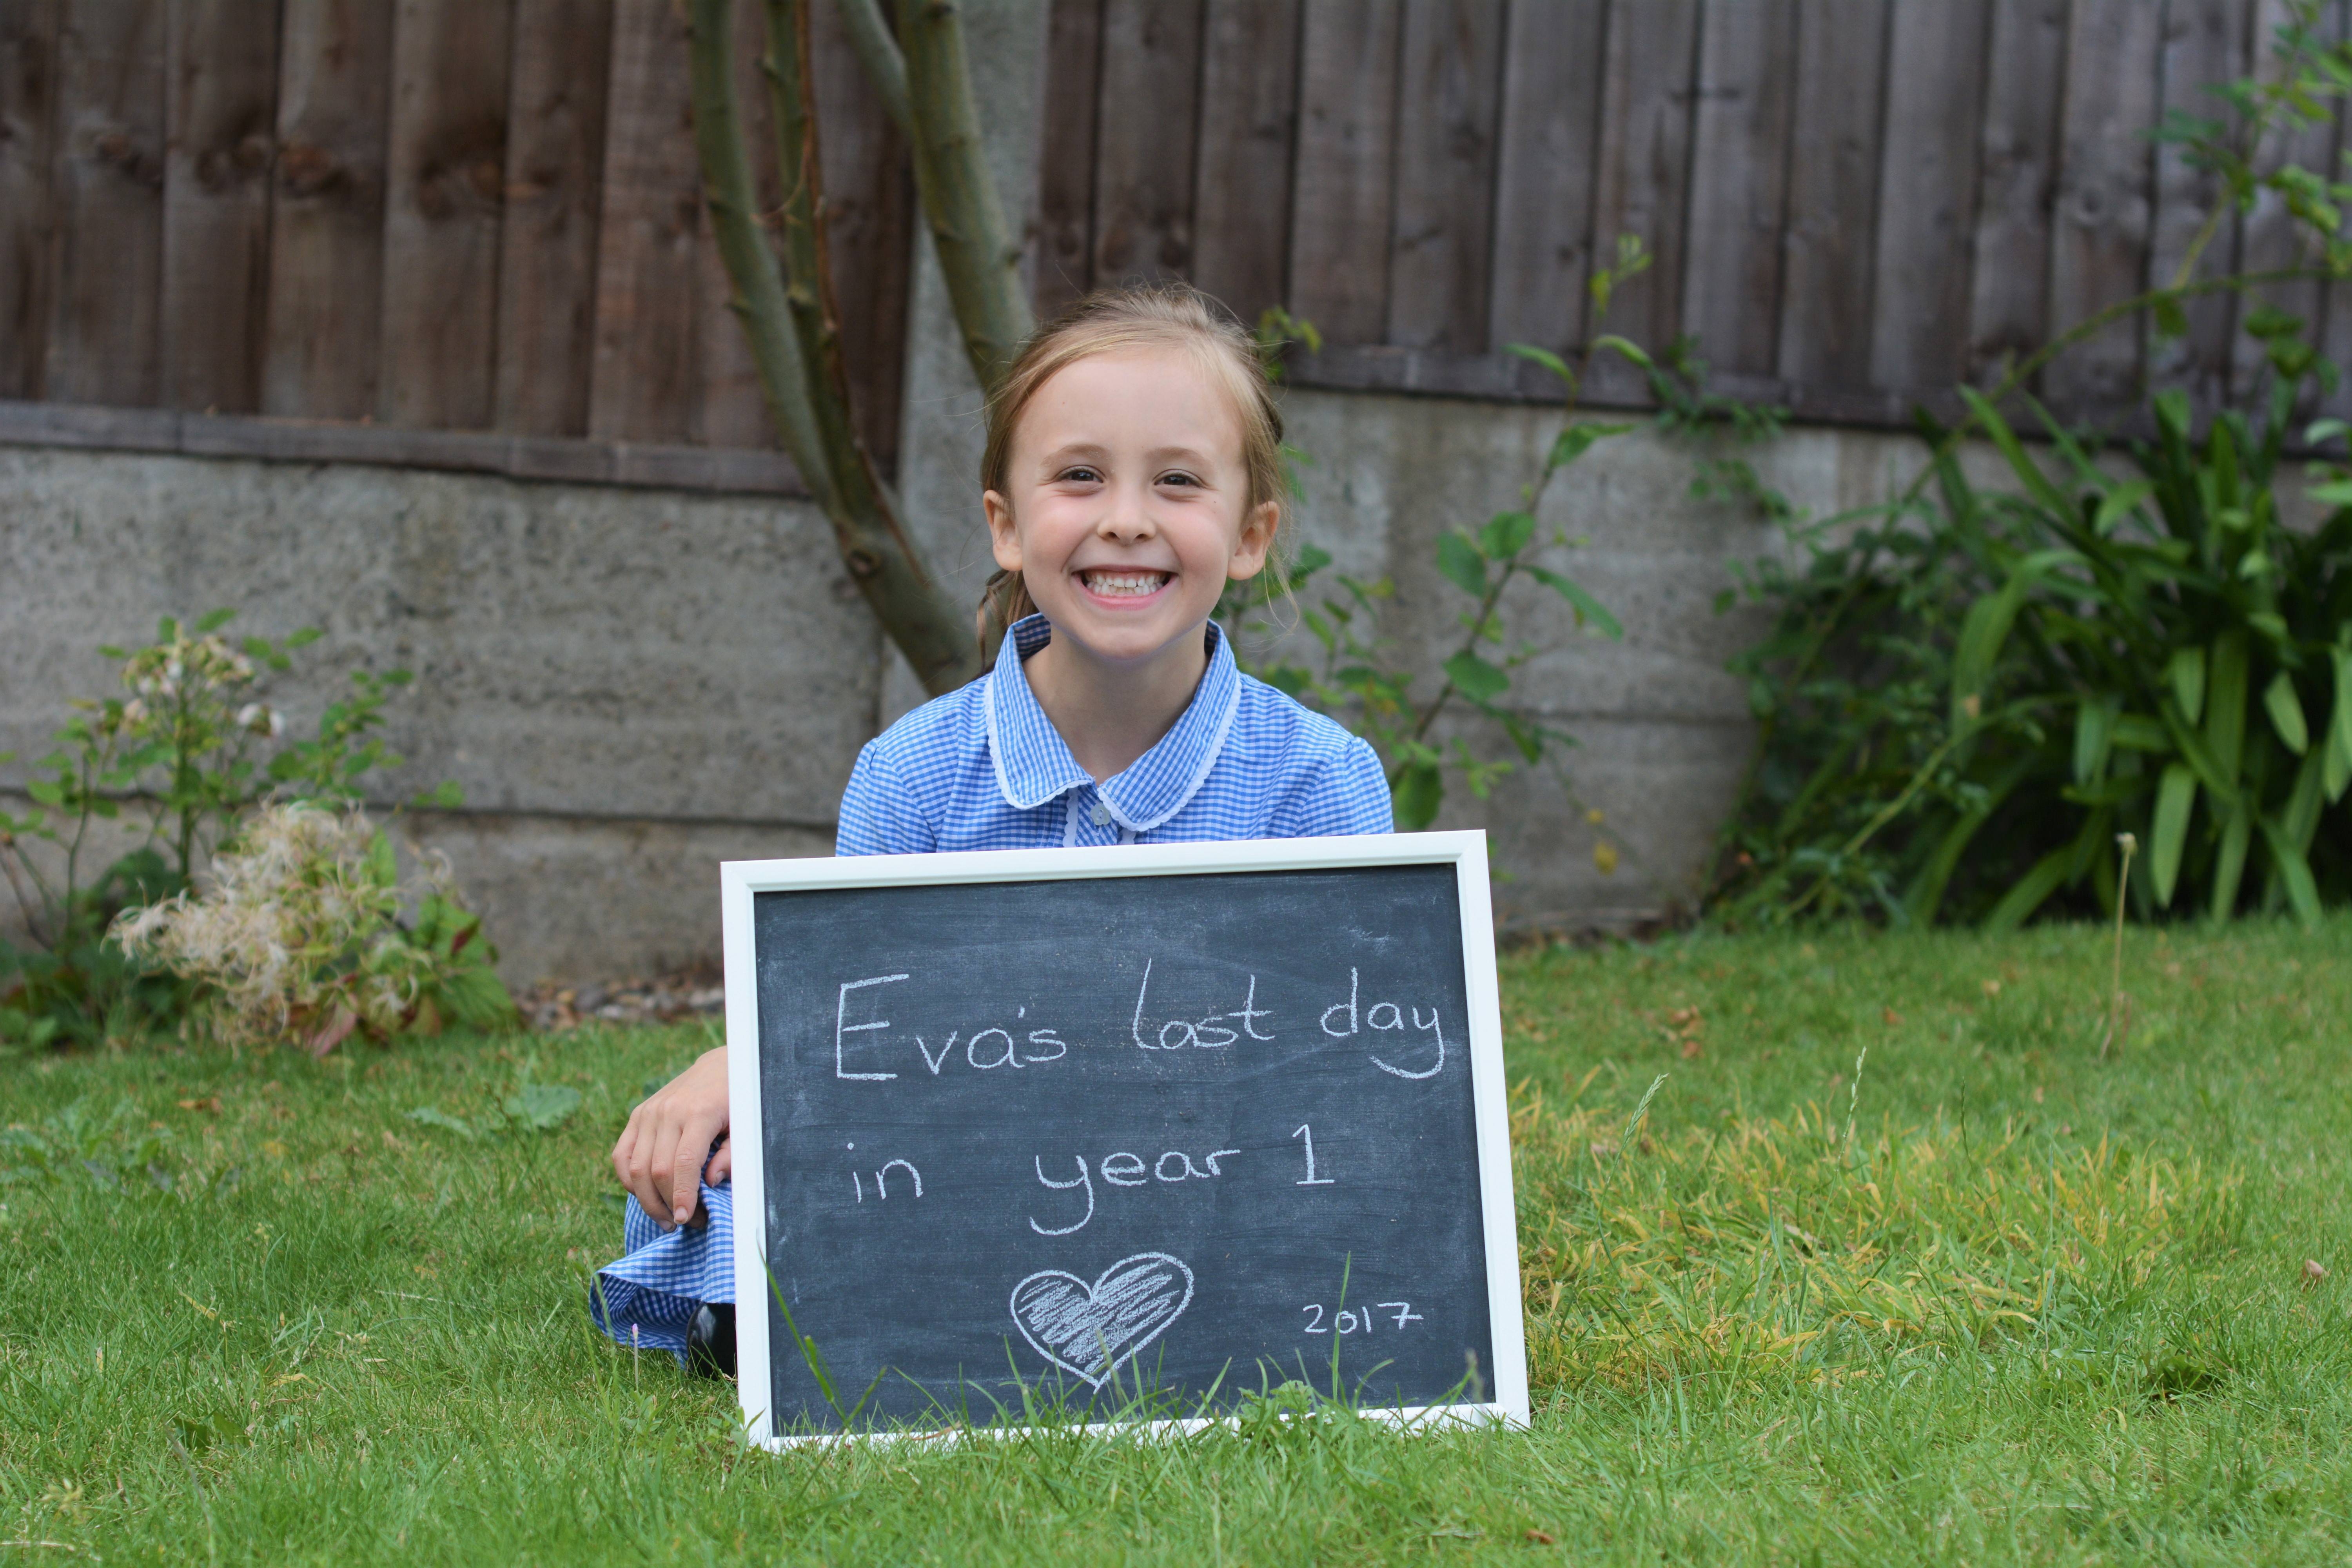 She school this year. End of School. Moving School. End of School year. Ordinary School.